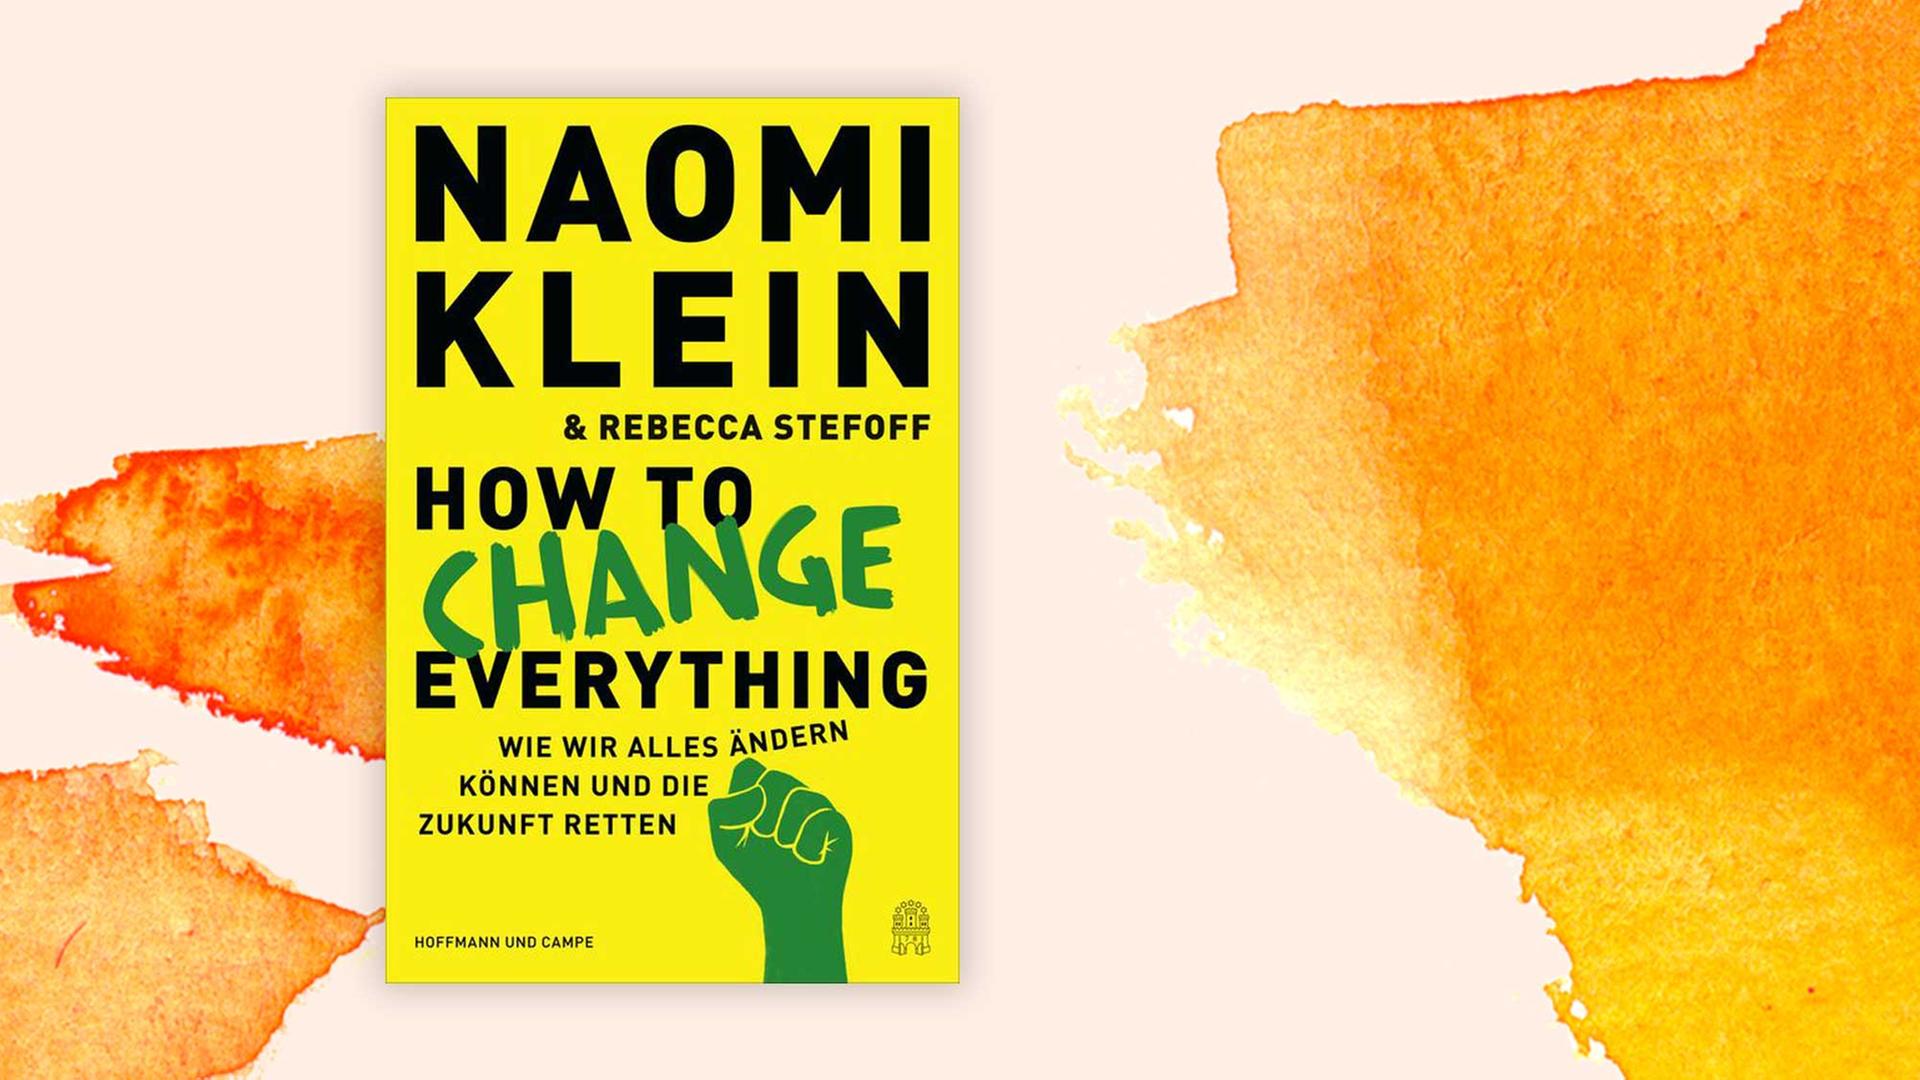 Buchcover zu "How to change everything"